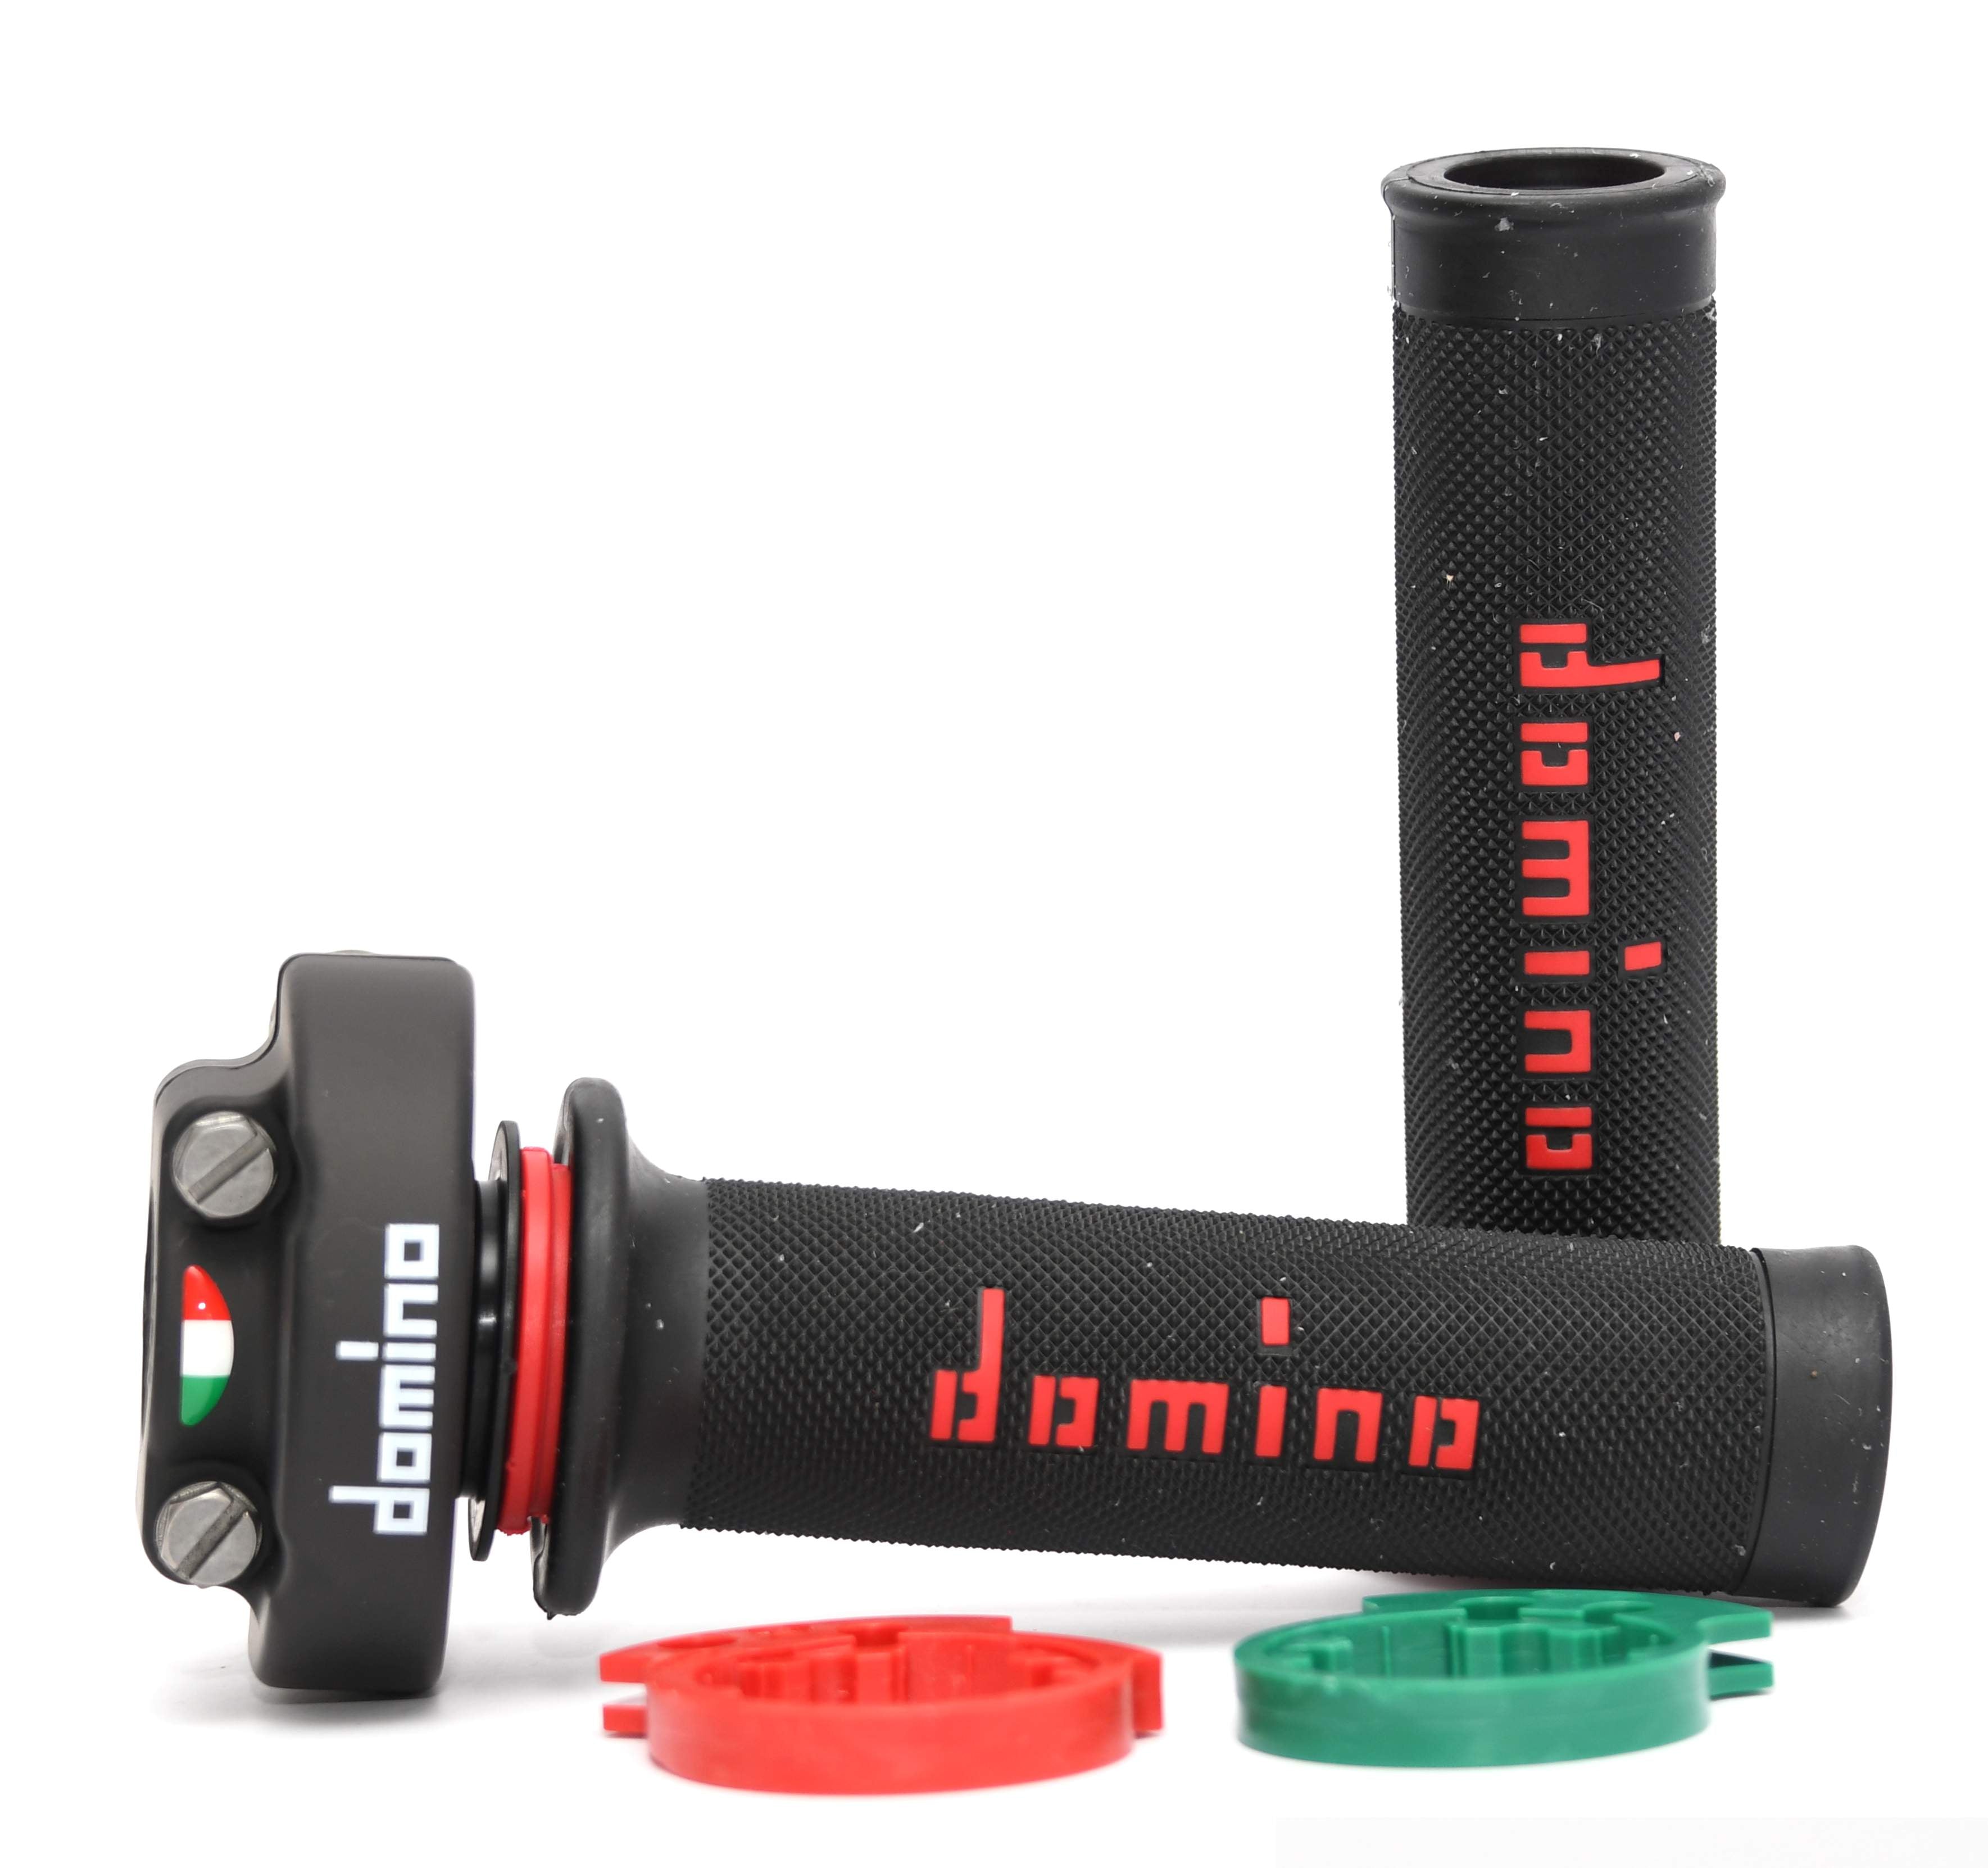 Domino XM2 Push/Pull Quick Action Throttle and A010 Grips